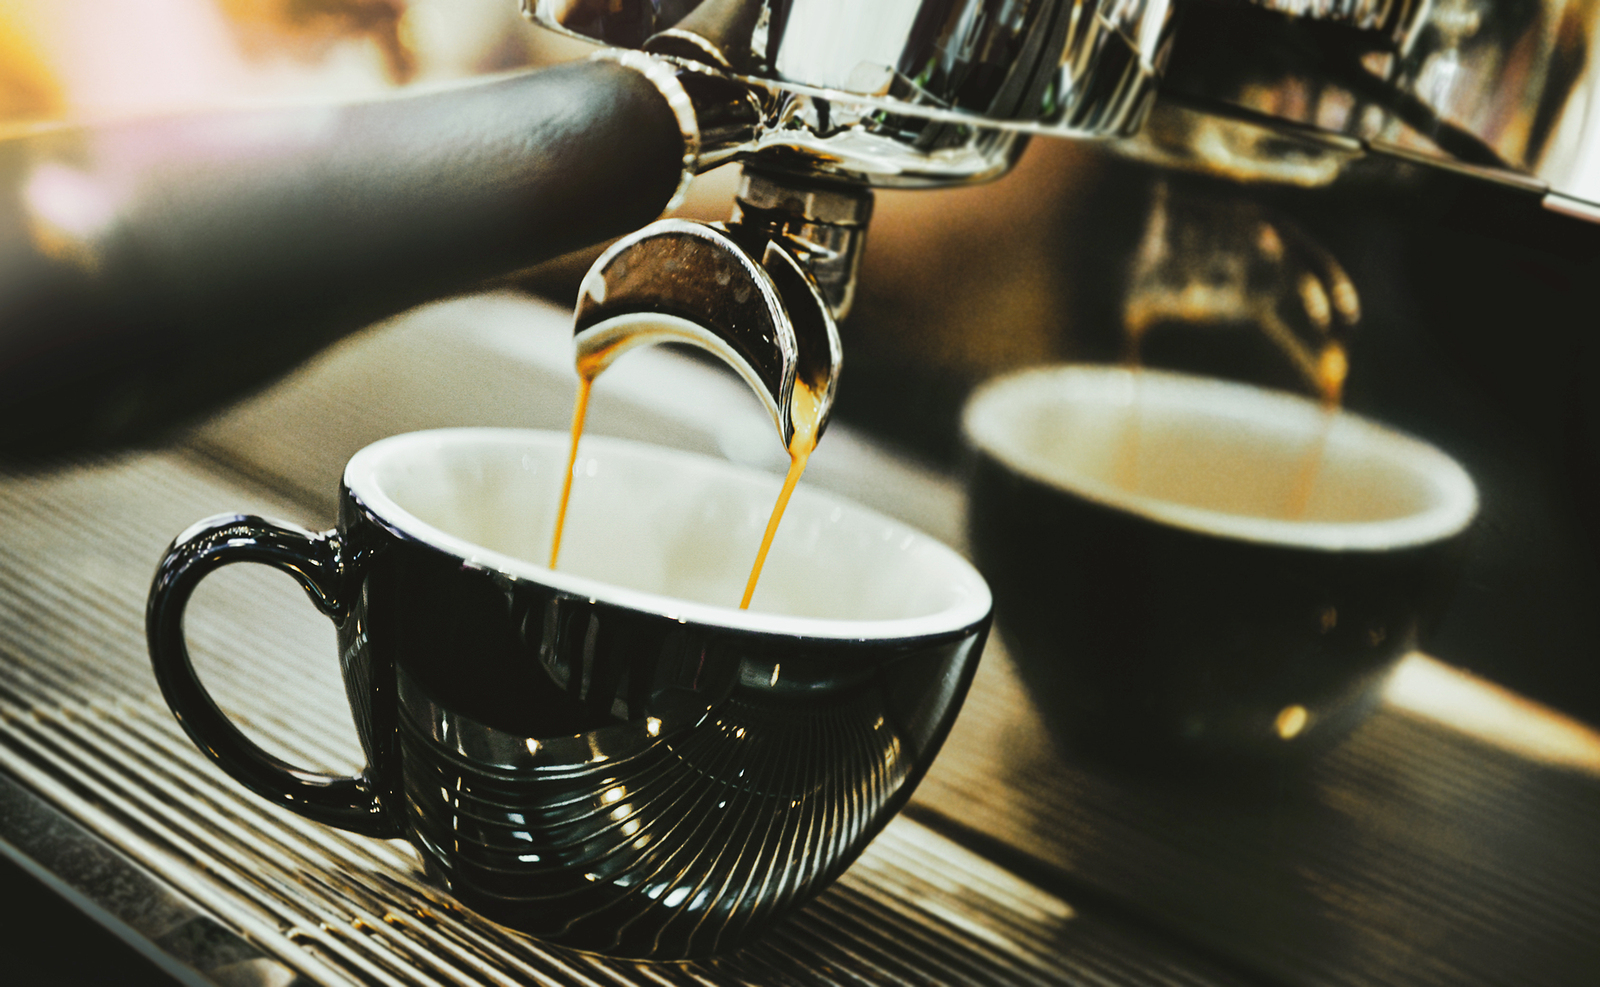 Battle of the Espresso: Is It an Italian or a Neapolitan Tradition? | Italy Magazine